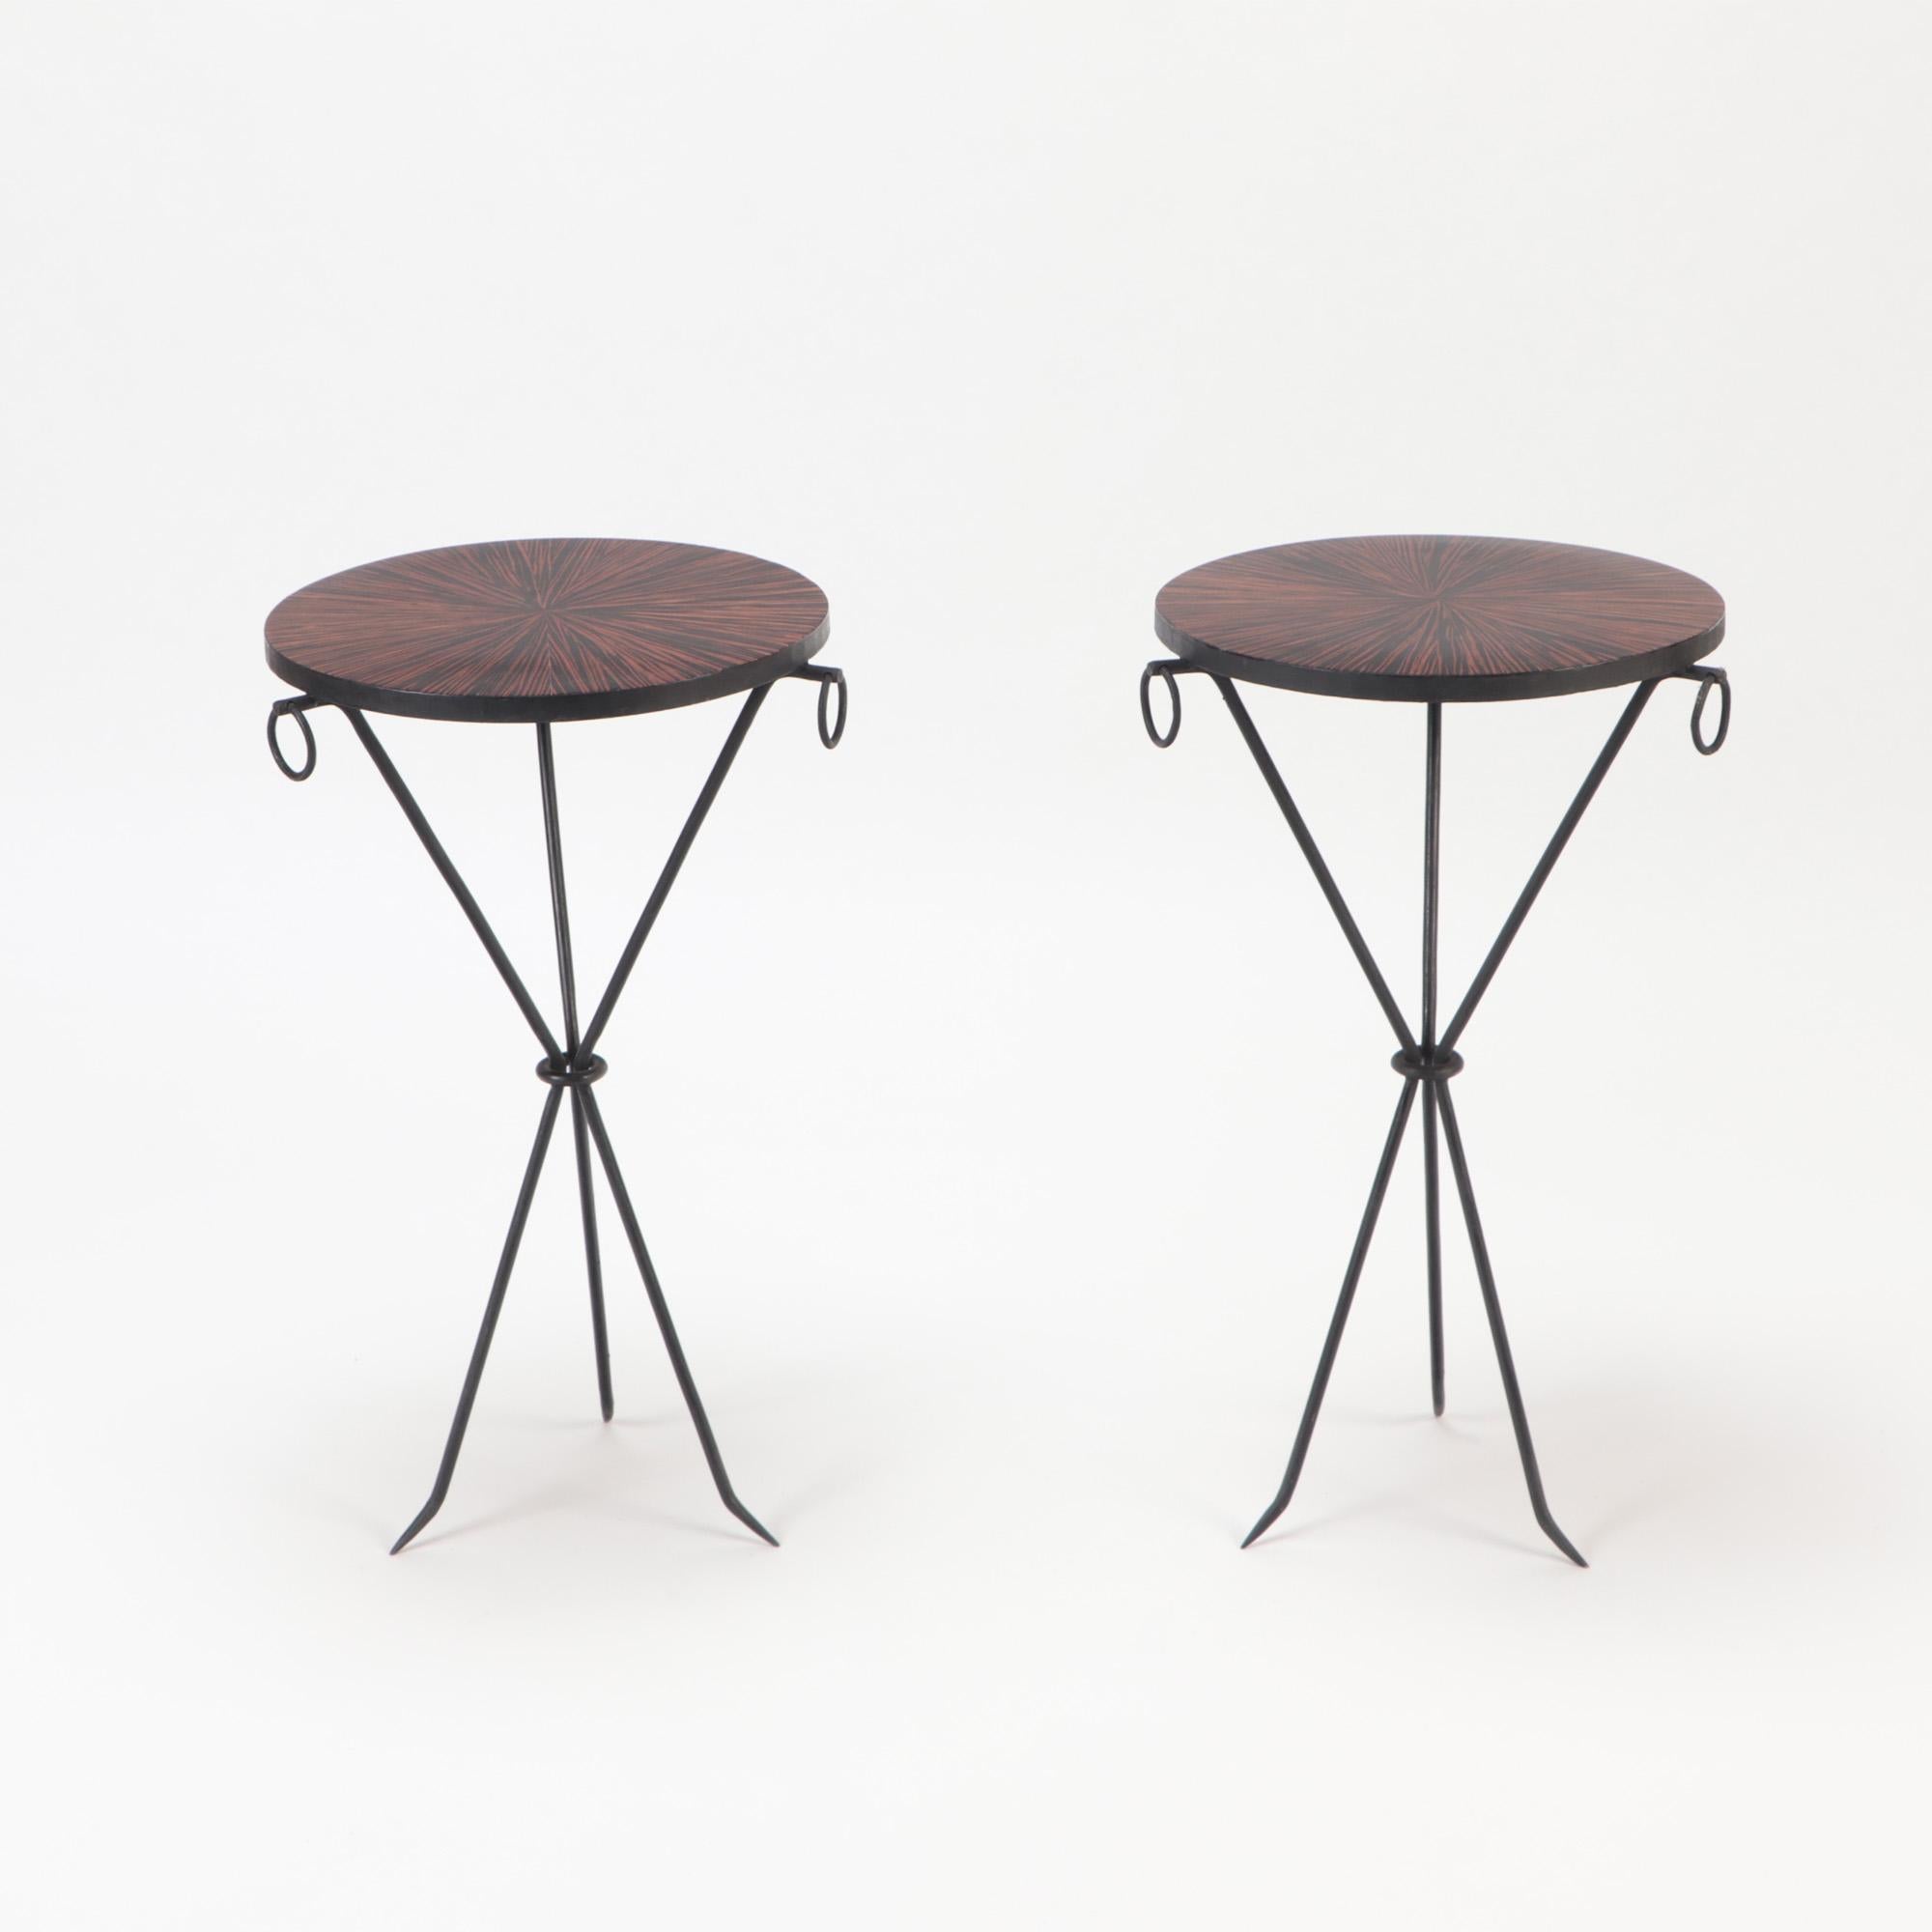  A pair of wrought iron drink tables with parquet tops and three iron rings. in the manner of Jean-Michel Frank. The tables rest on a sleek tripod form base.